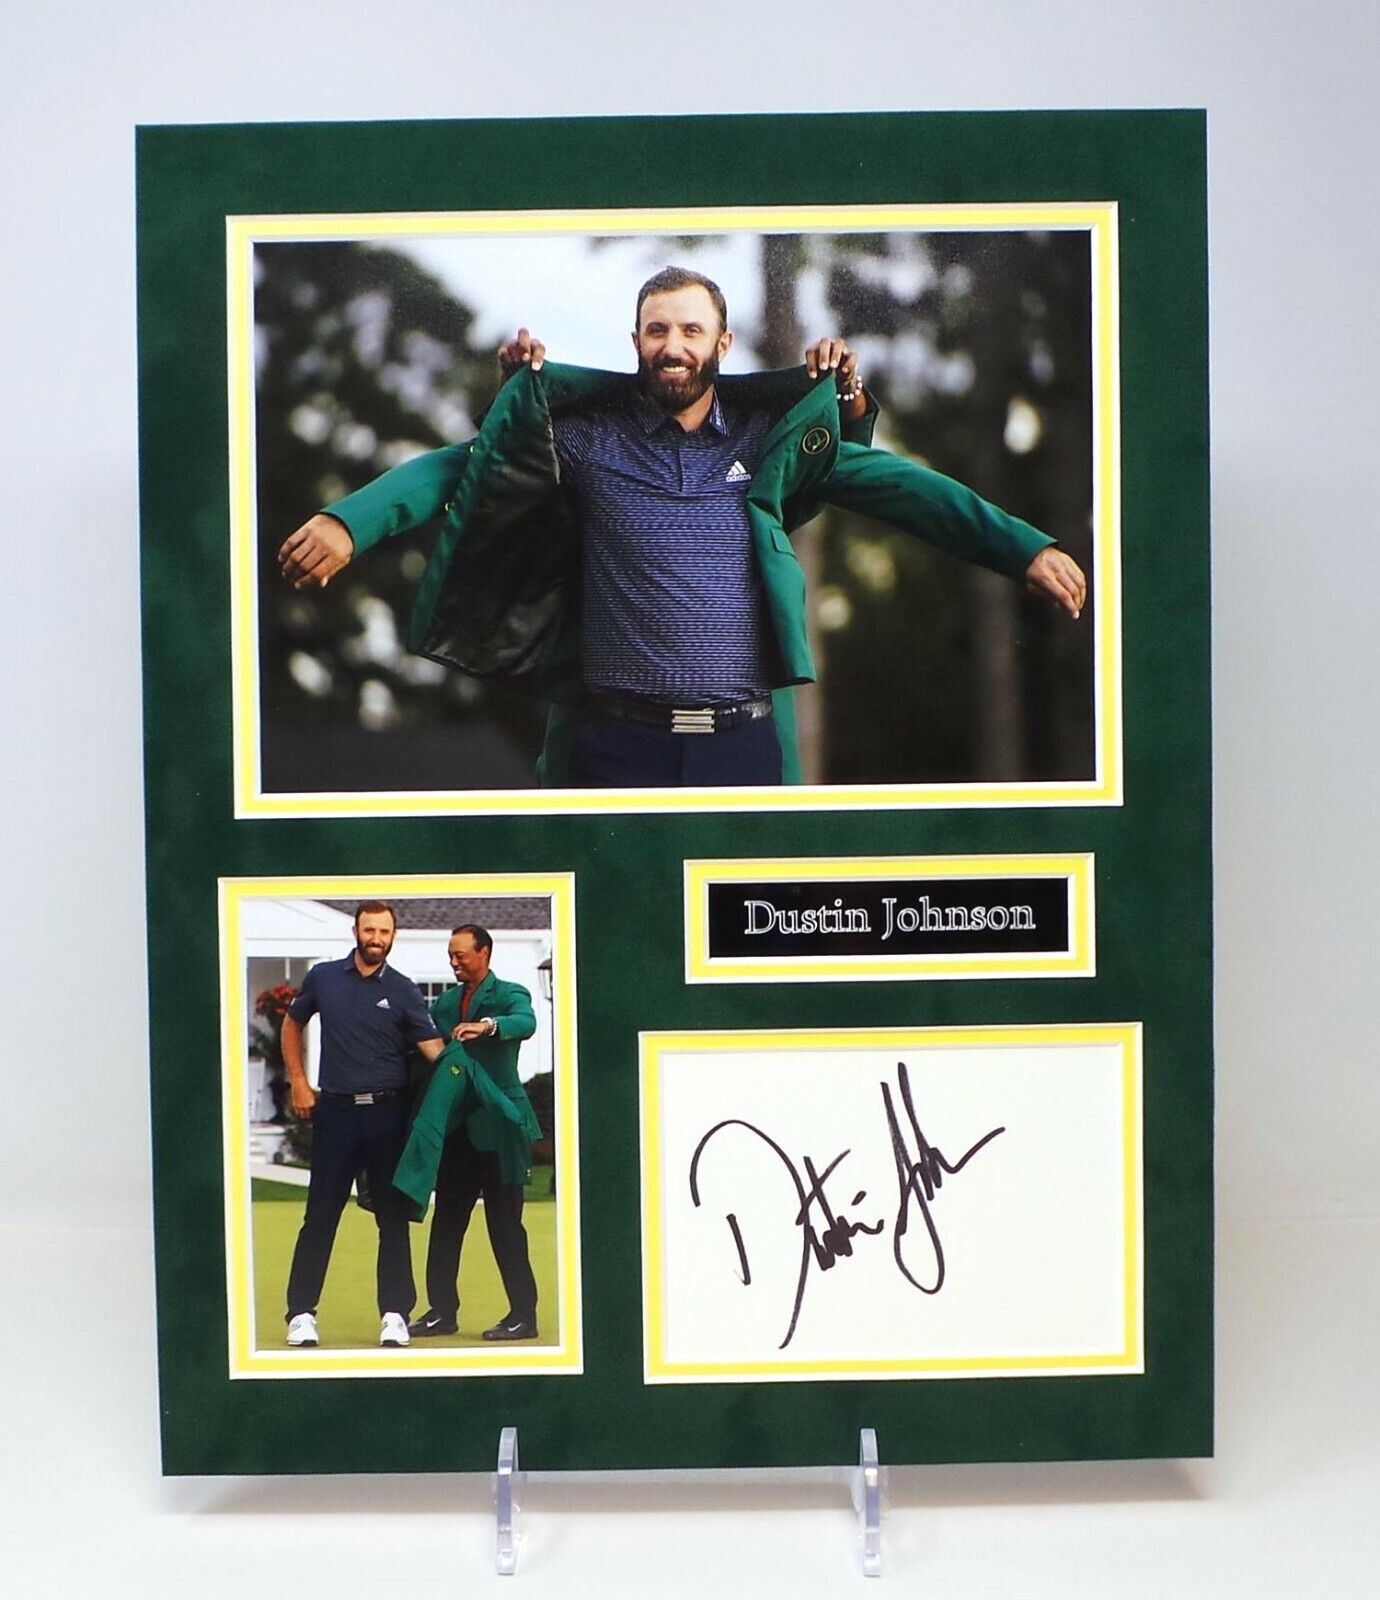 Dustin JOHNSON Signed Mounted Photo Poster painting Display 1 AFTAL RD COA The Masters Winner